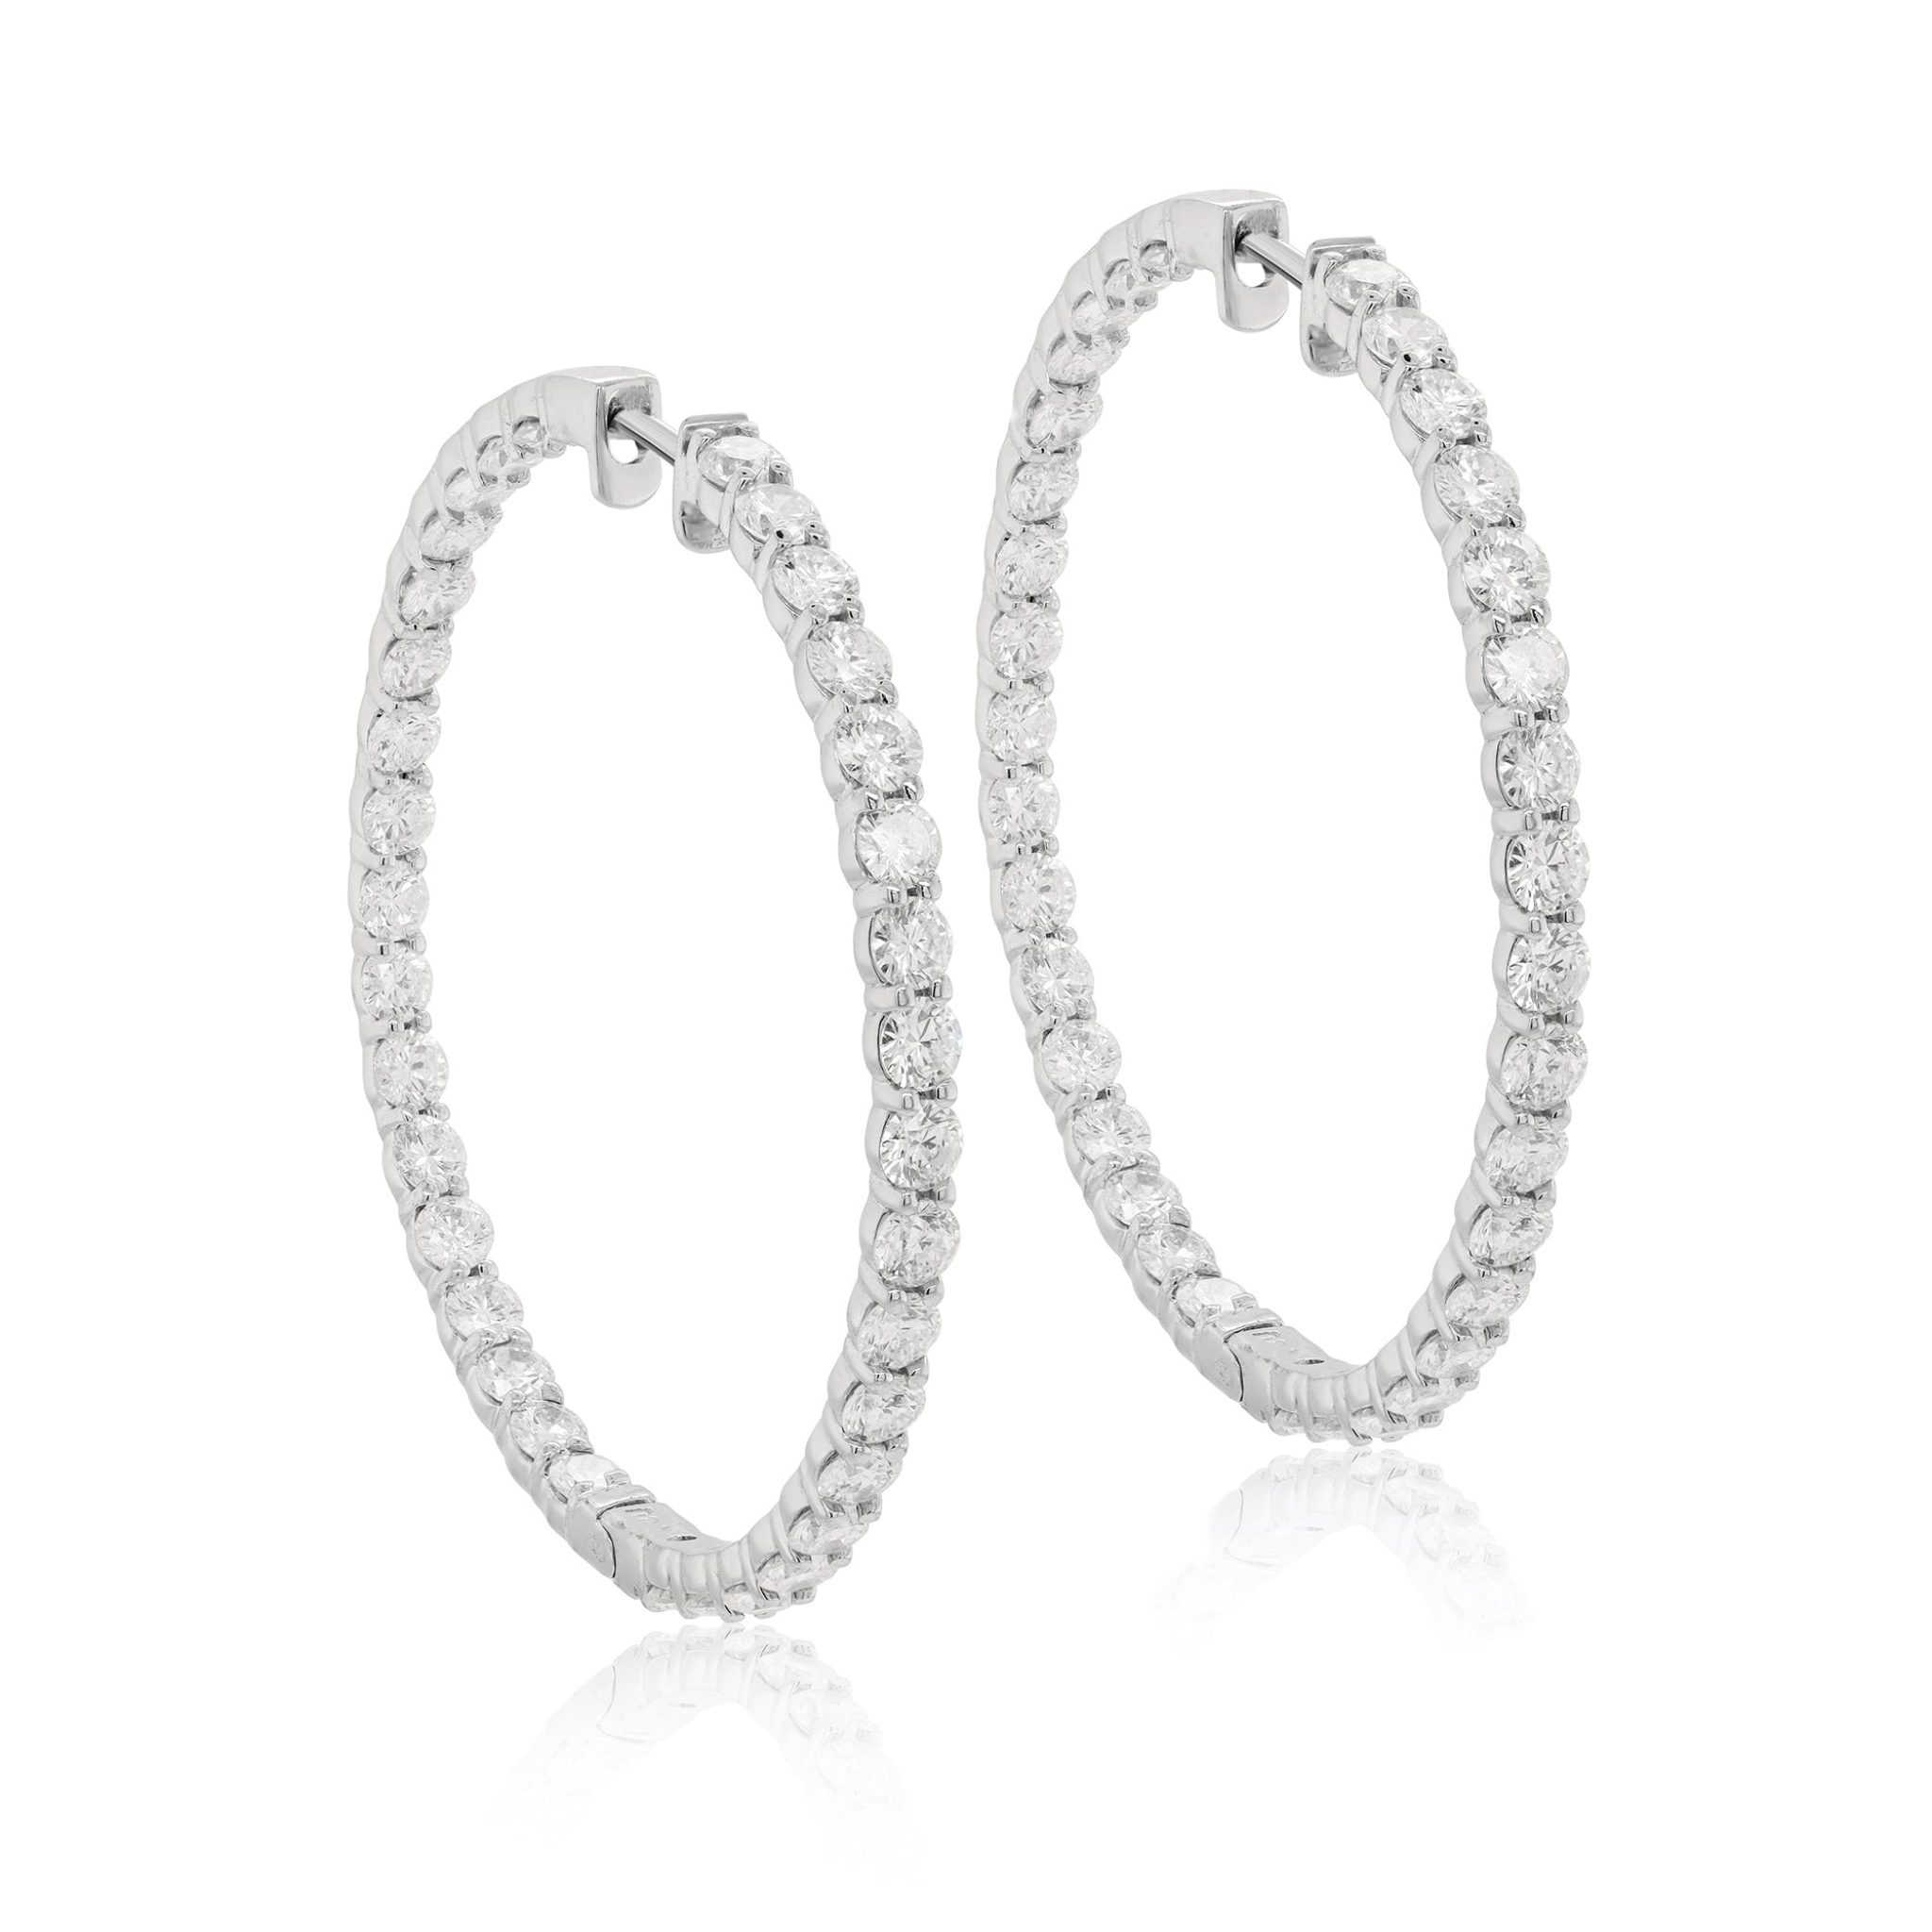 14 Kt White Gold 2.00" Hoop Earrings with 9.45 cts.jpg